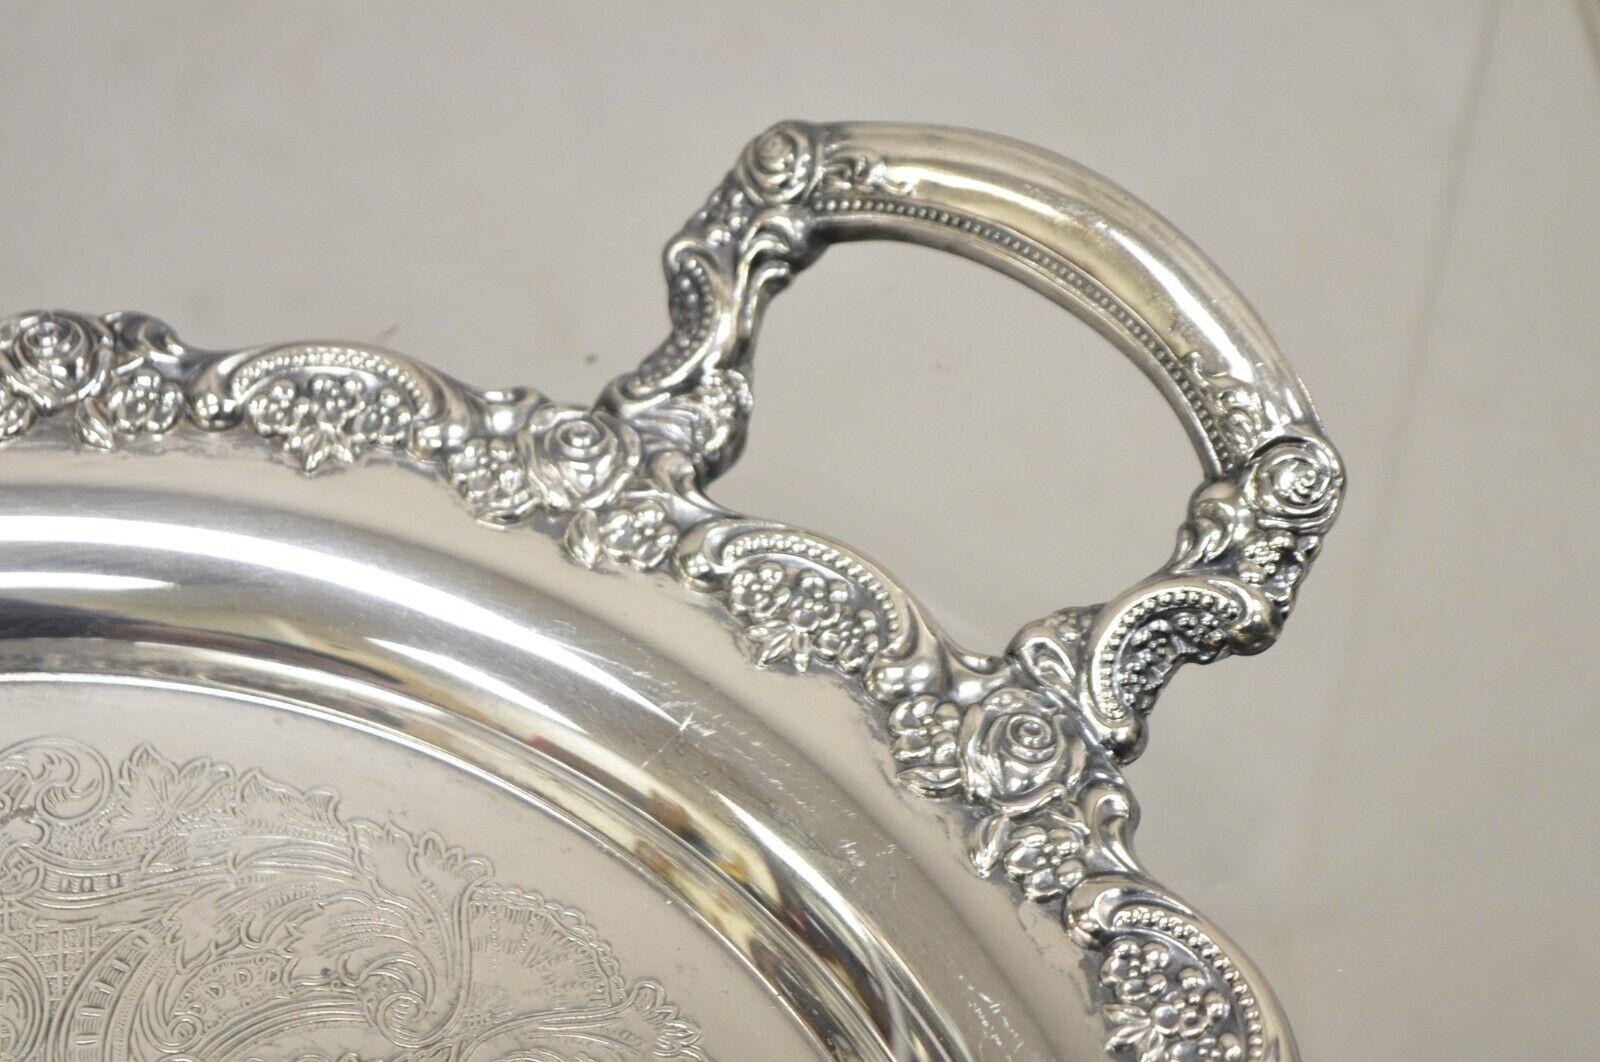 Vtg Oneida Victorian Style Round Silver Plated Serving Platter Tray w handles For Sale 1